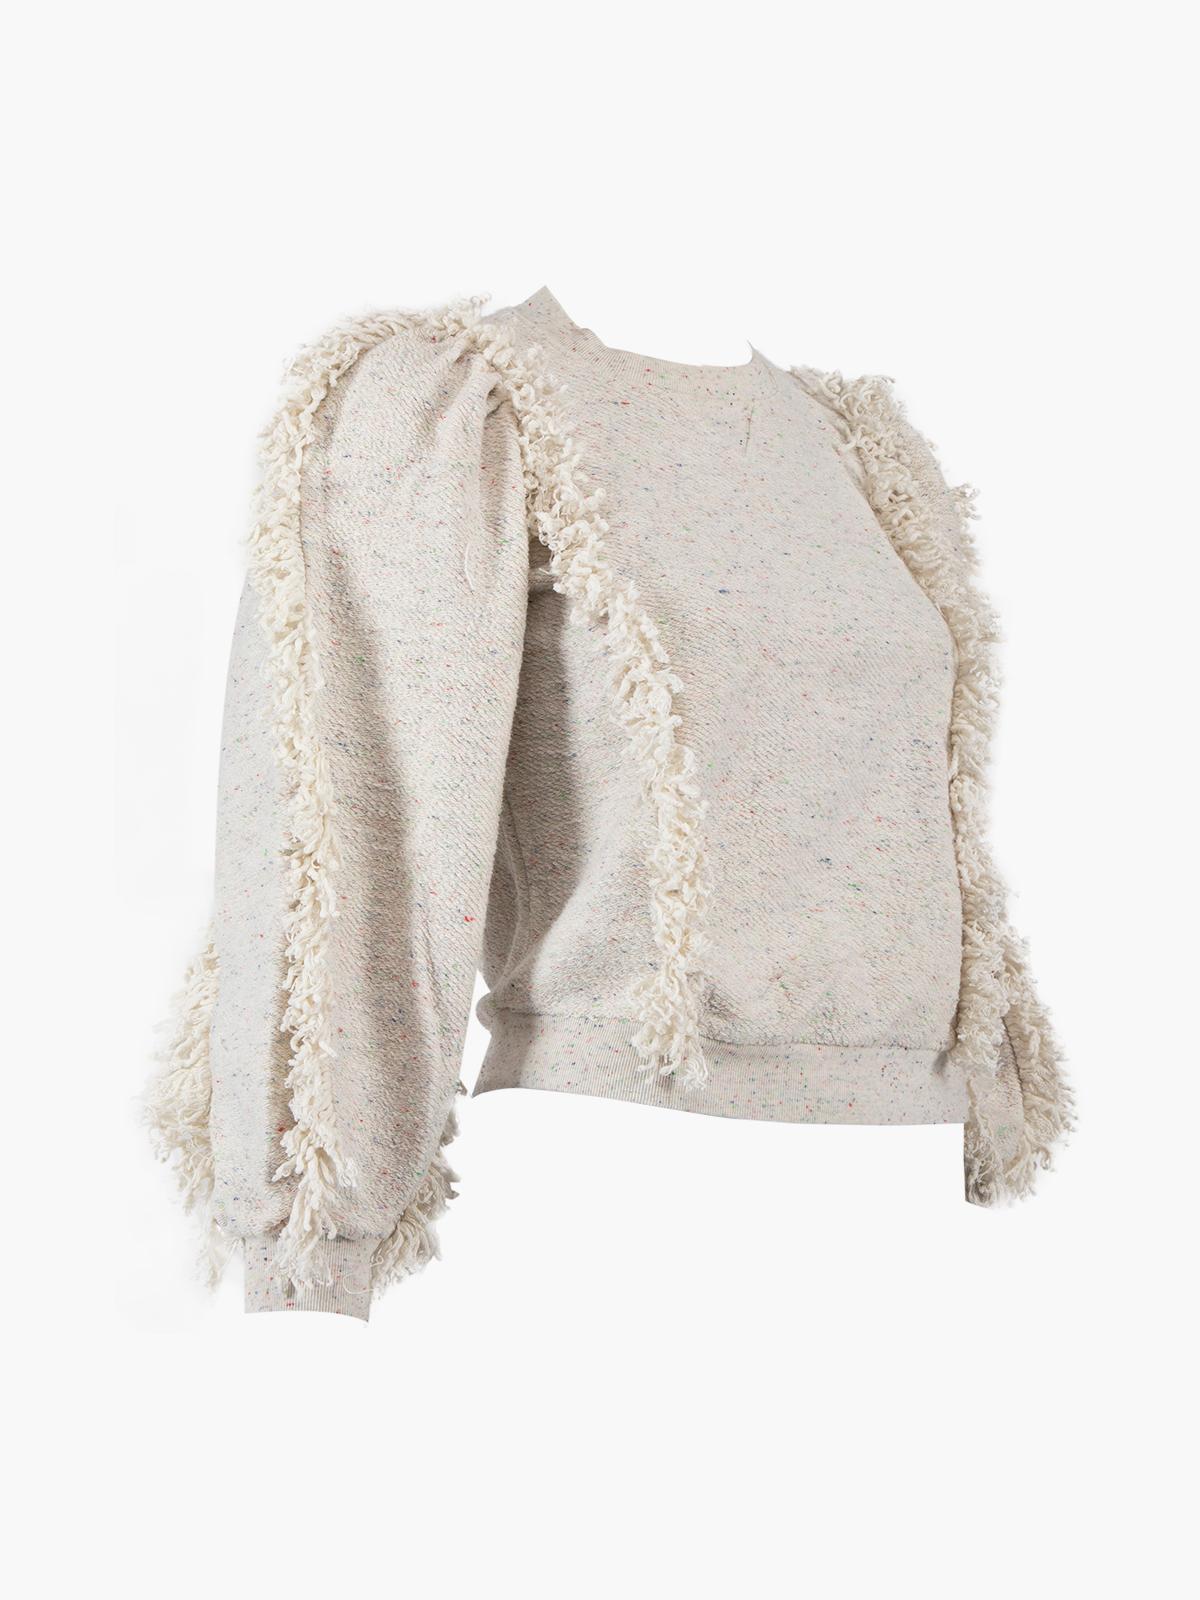 CONDITION is Very good. Hardly any visible wear to sweater is evident on this used Ulla Johnson designer resale item. Details Beige Multicoloured speckles Cotton Fringe sleeves Loose fit Long sleeves Round neck Made in Portugal Composition OUTER: